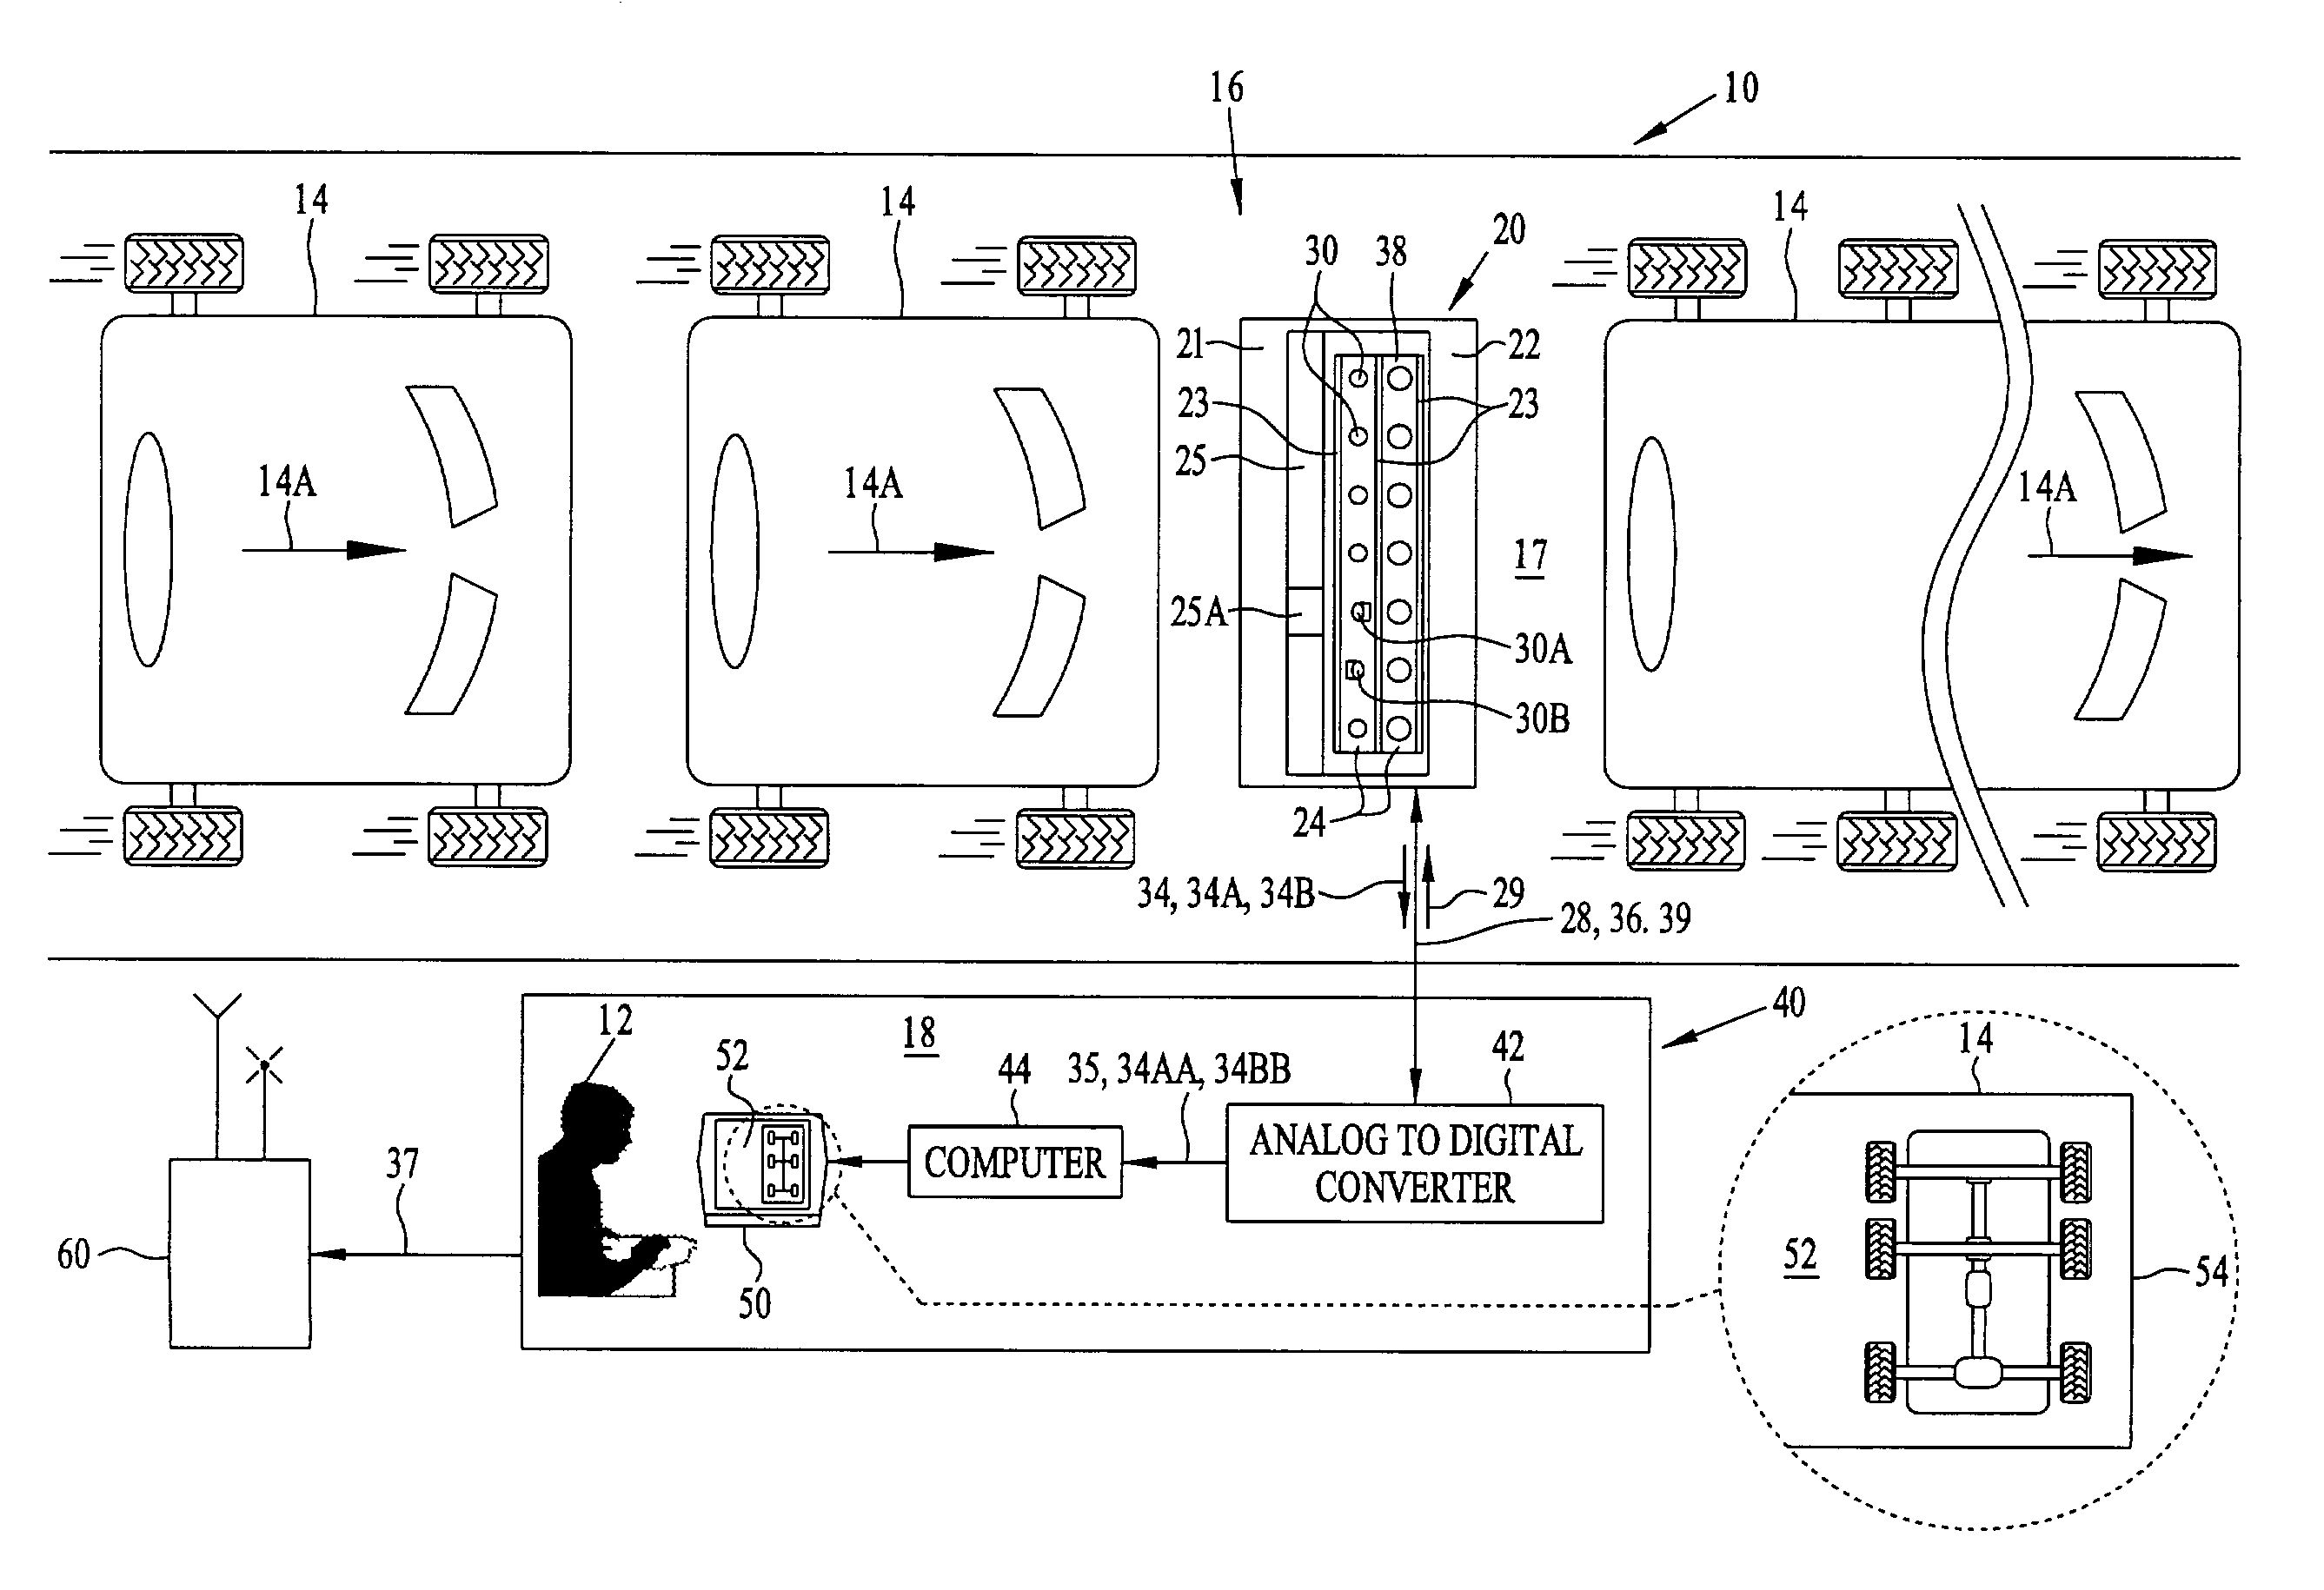 Vehicle underbody imaging system